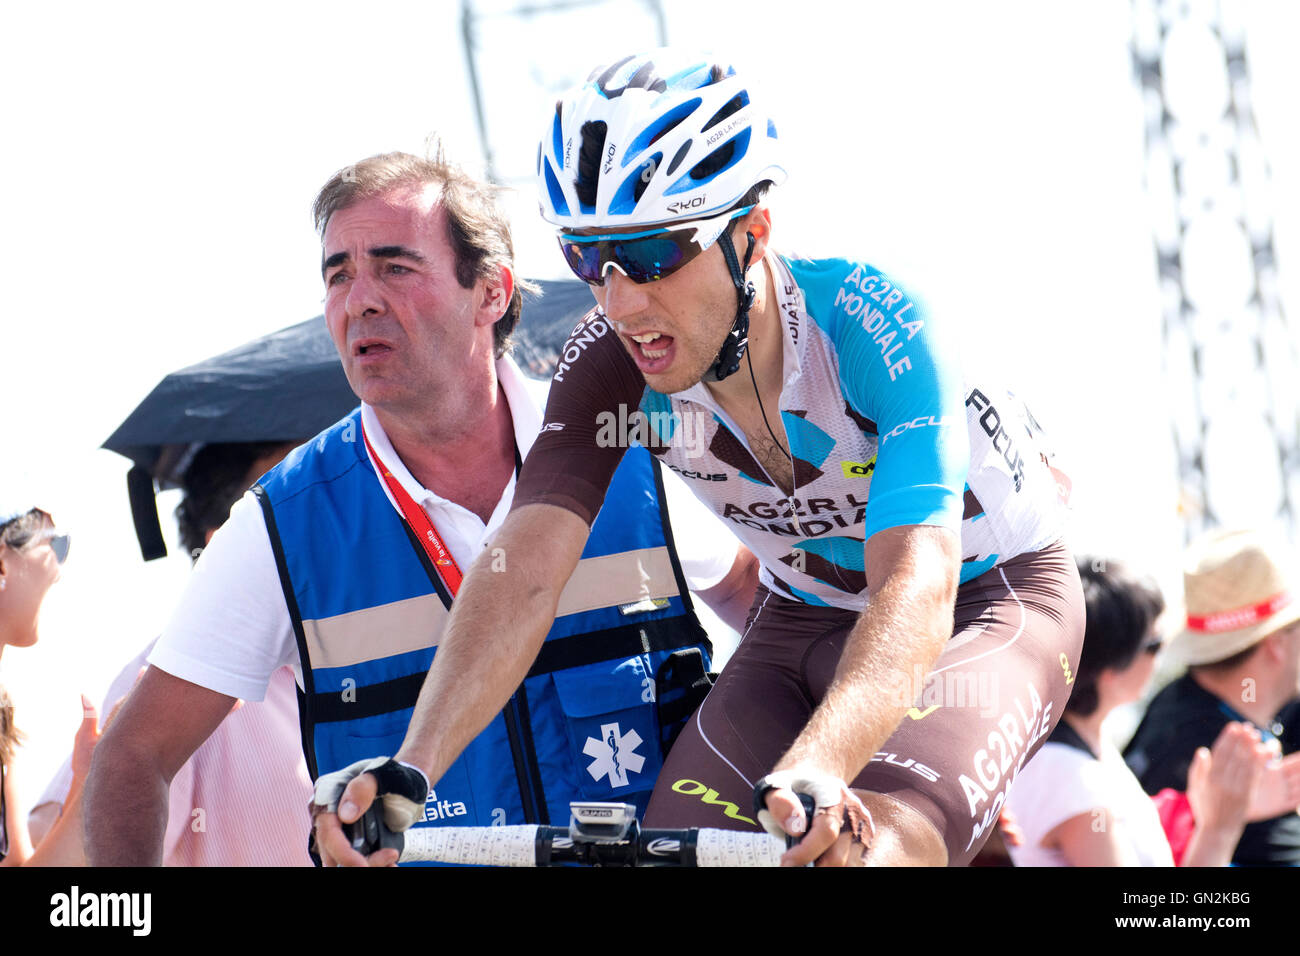 La Camperona, Spain. 27th August, 2016. Axel Domont (AG2R La Mondiale) finishes the 8th stage of cycling race ‘La Vuelta a España’ (Tour of Spain) between Villalpando and Climb of La Camperona on August 27, 2016 in Leon, Spain. Credit: David Gato/Alamy Live News Stock Photo